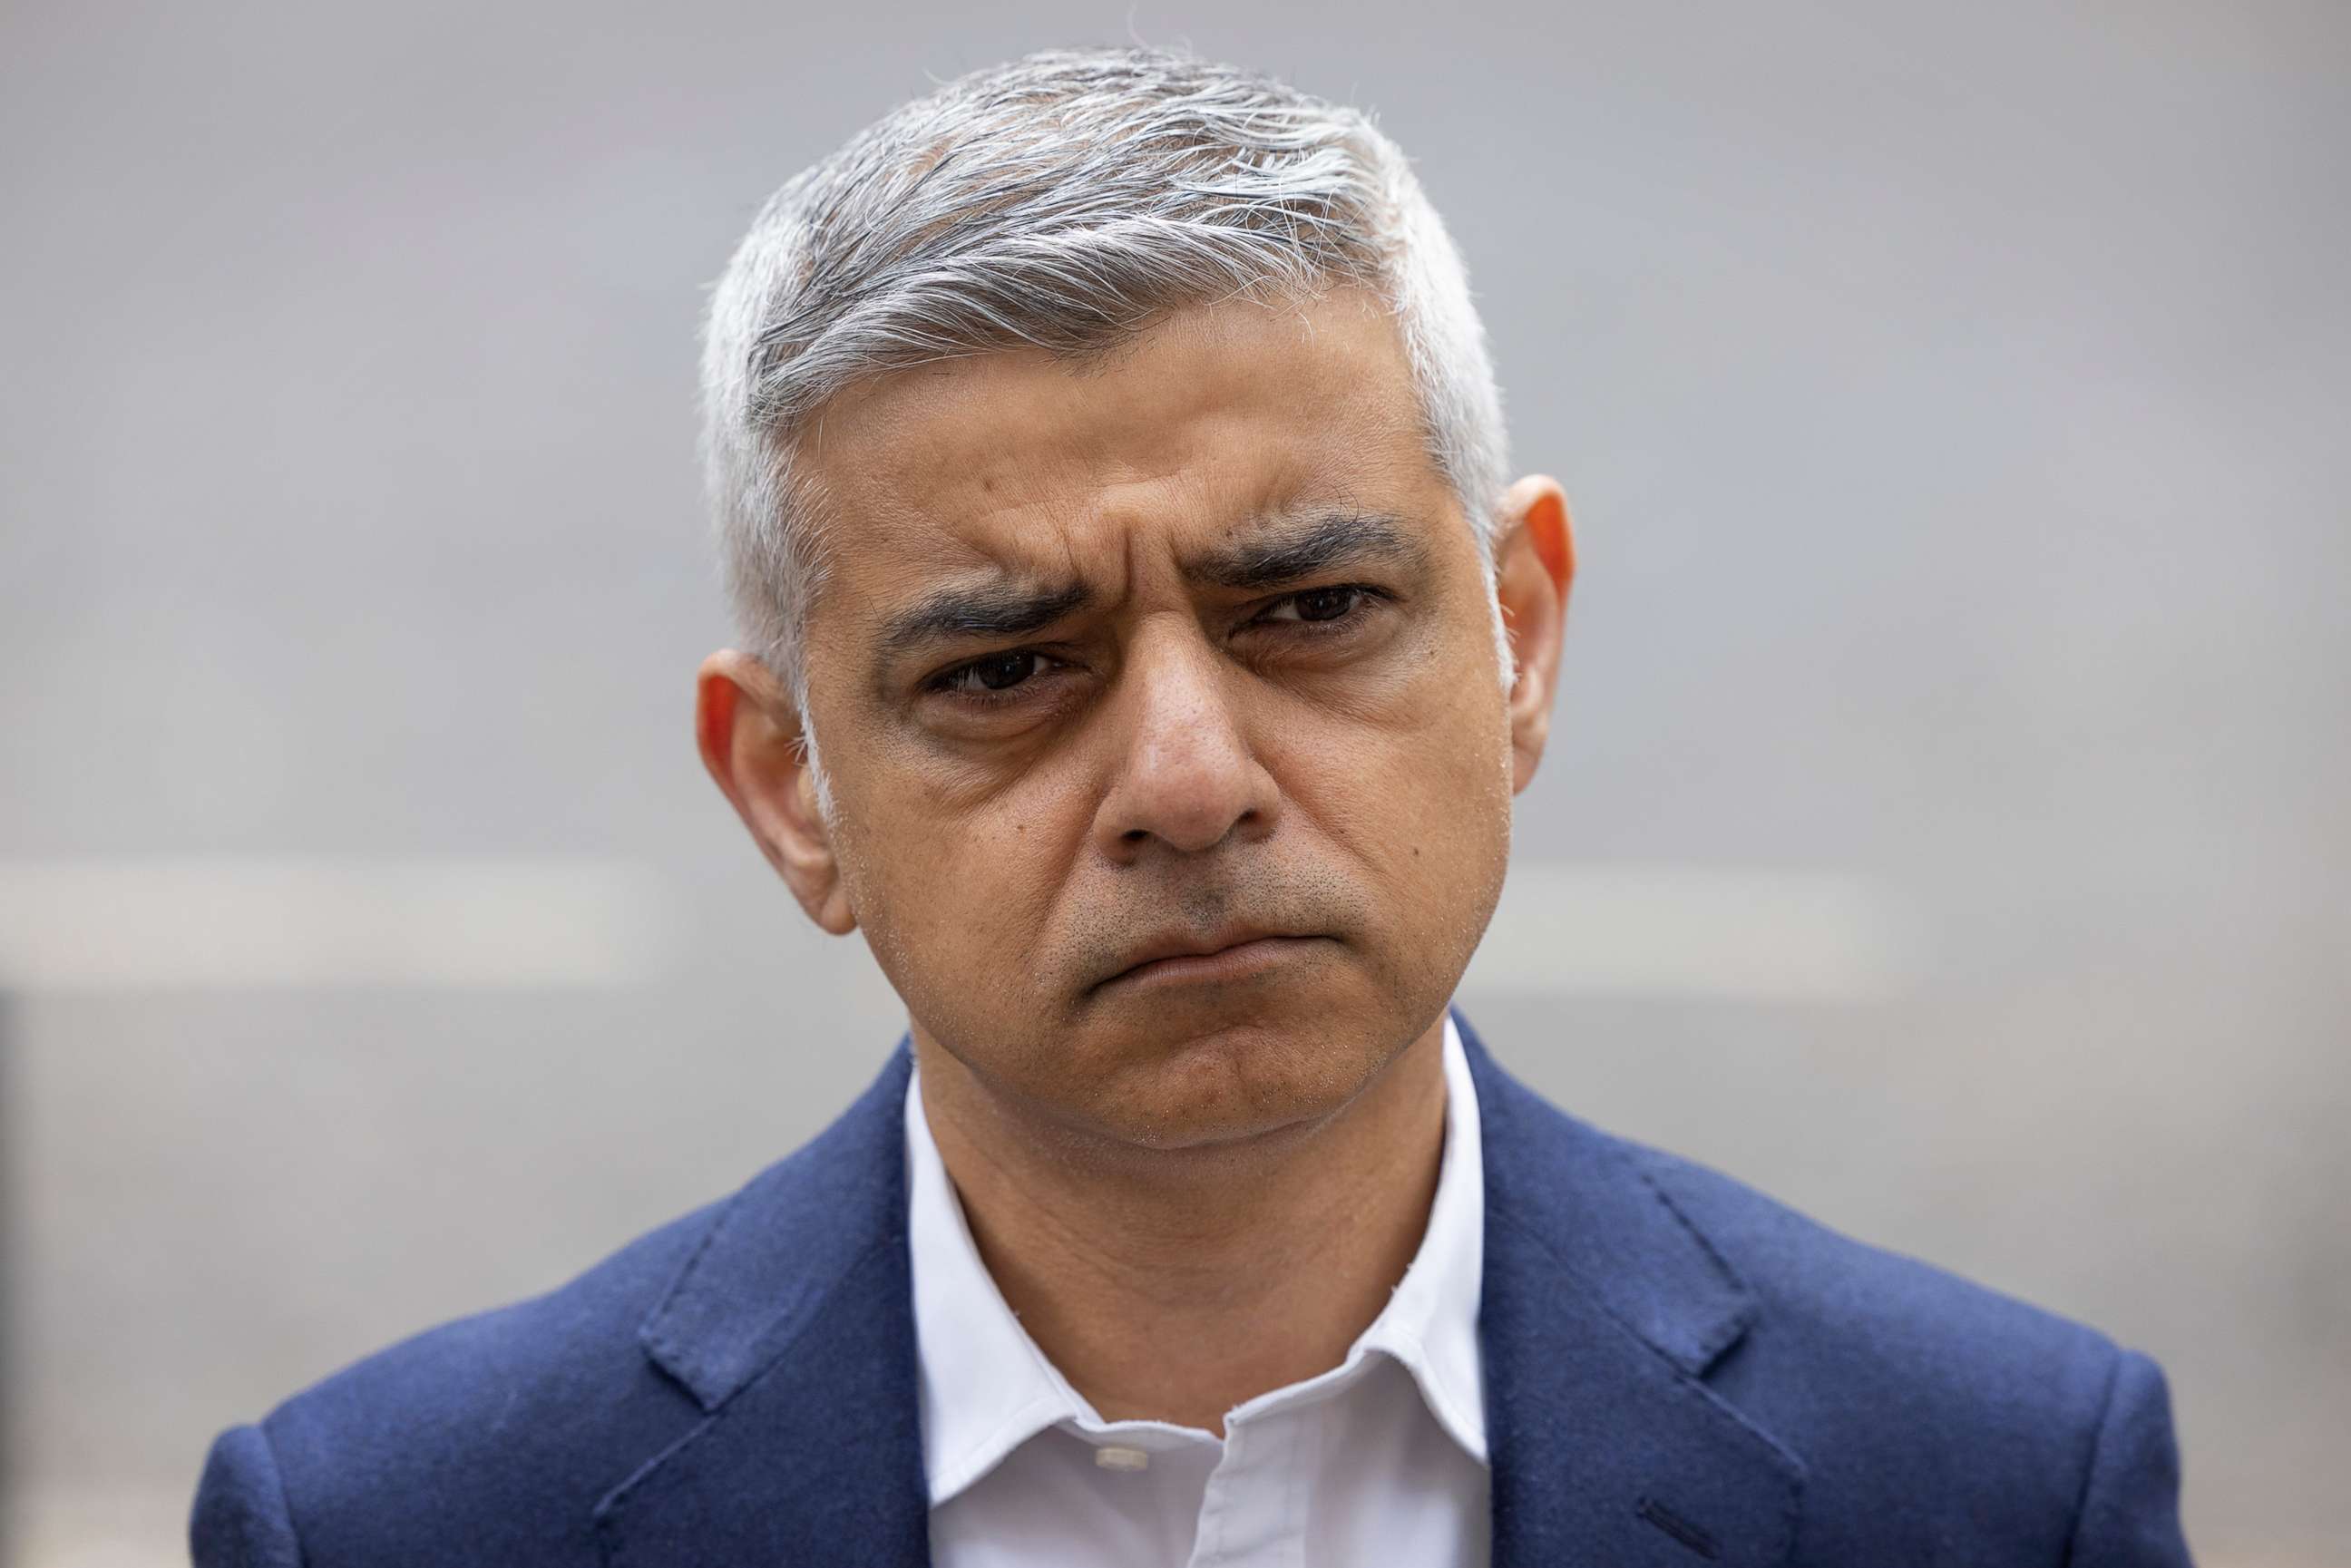 PHOTO: Mayor of London Sadiq Khan, unveils his campaign advert ahead the London Mayoral elections, on April 15, 2021 in London.